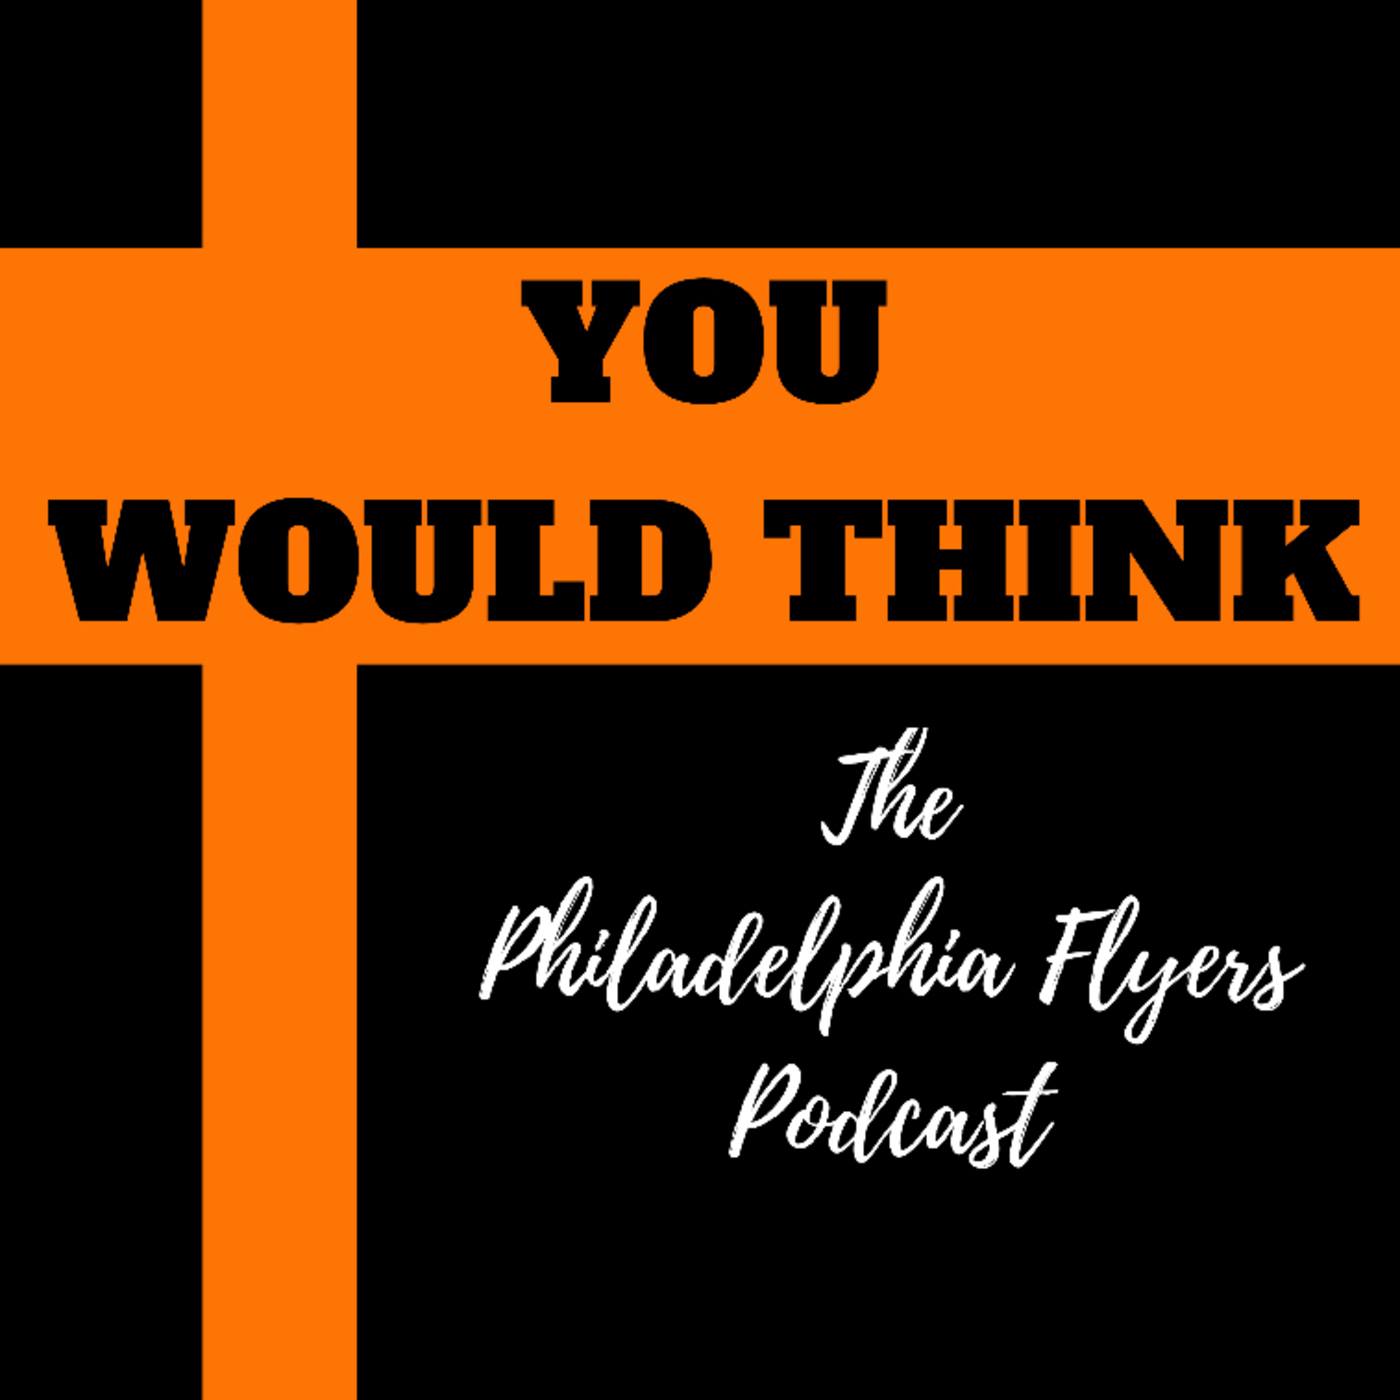 YWT: The Philadelphia Flyers Podcast – YWT #205 – It’s Been A Month